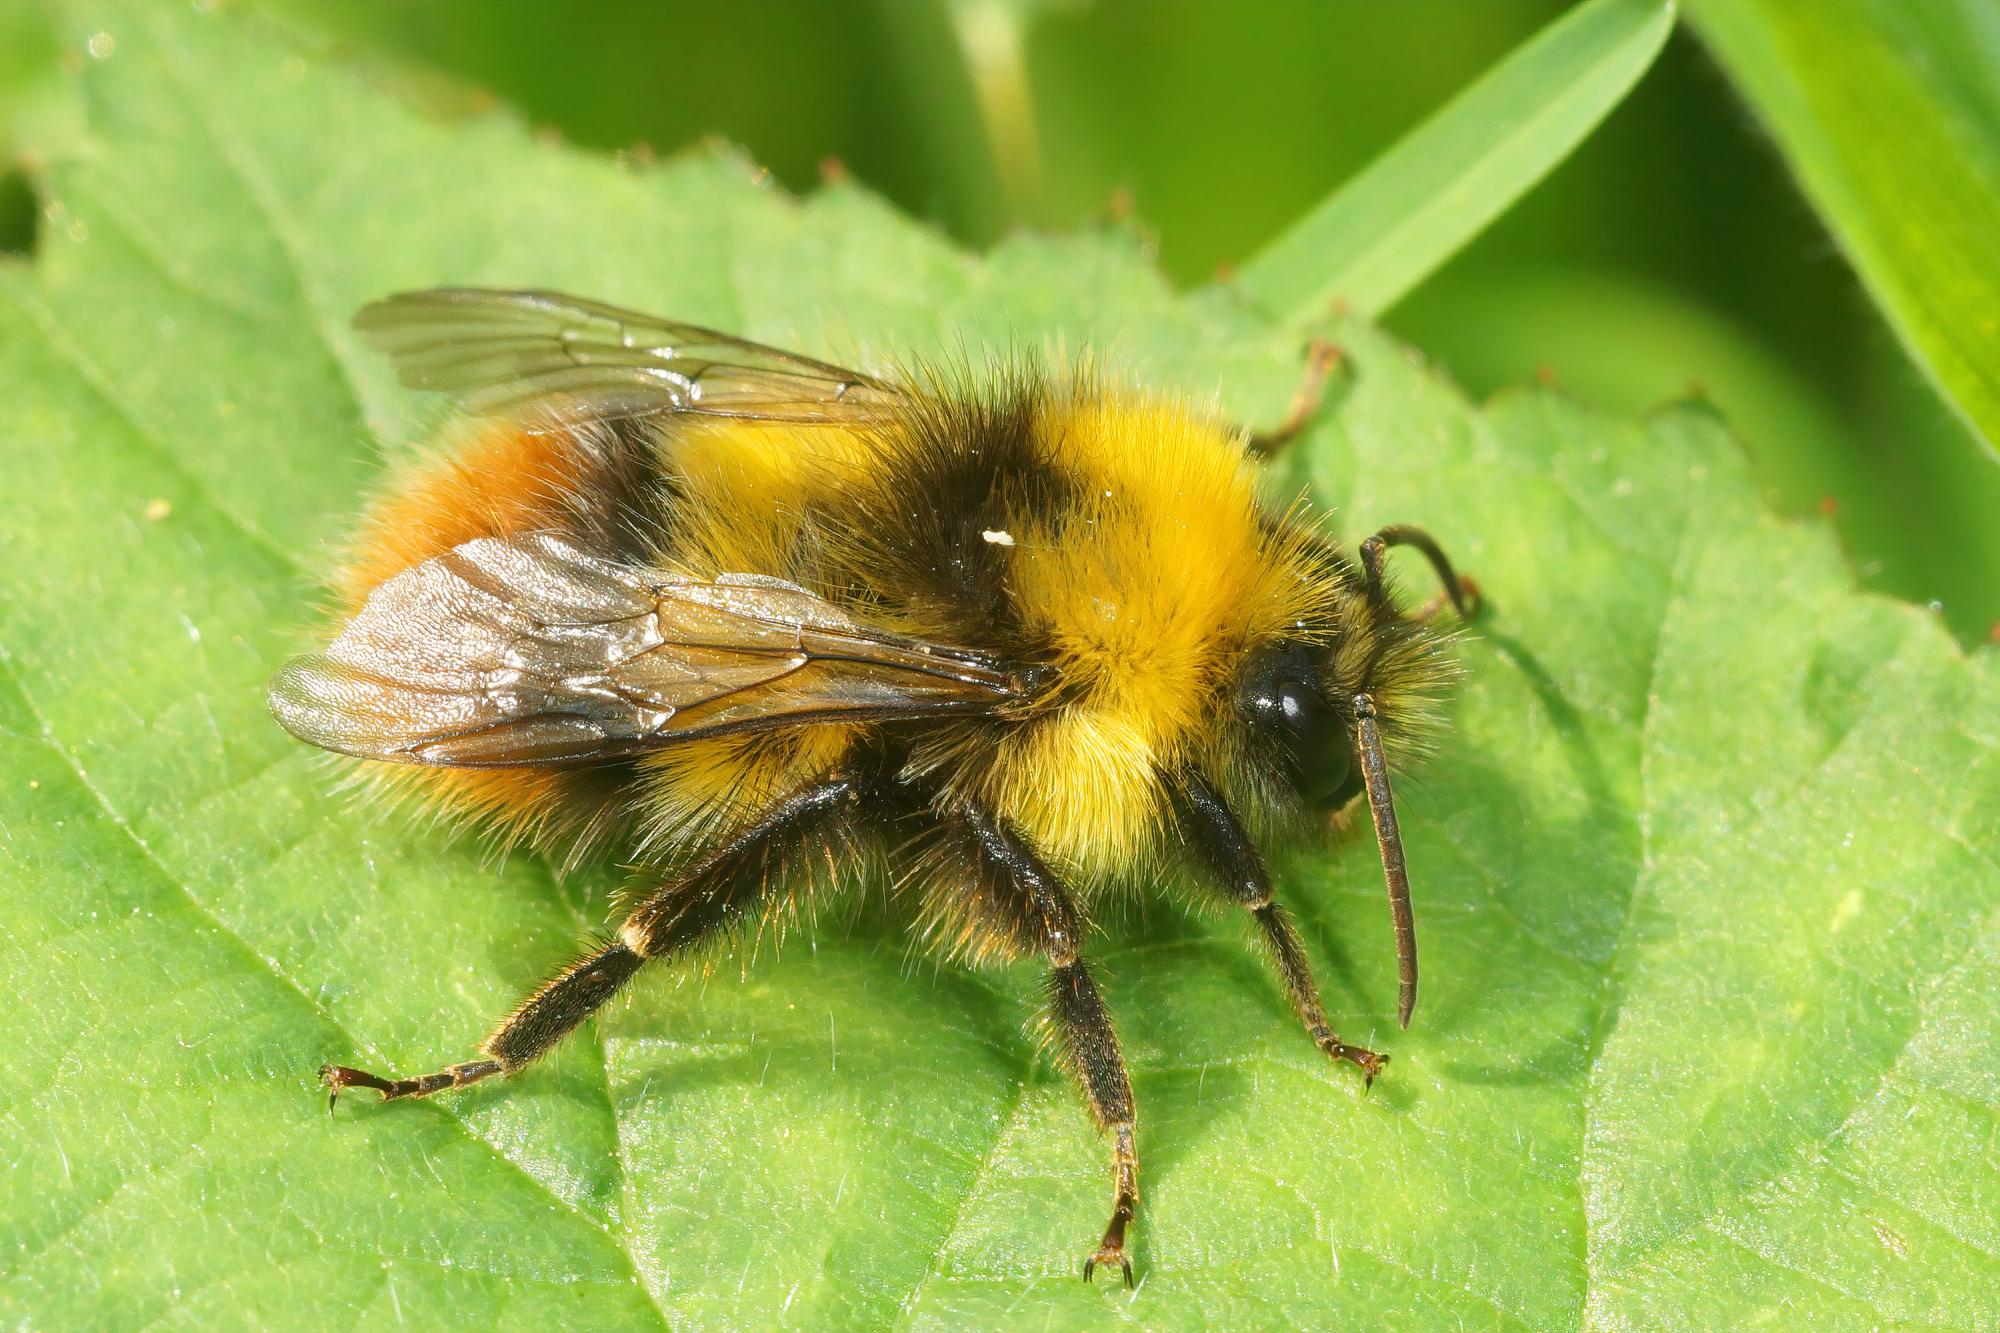 Close up of an early bumblebee on a bright green leaf. It has lemon yellow bands and black bands and an orange tail.